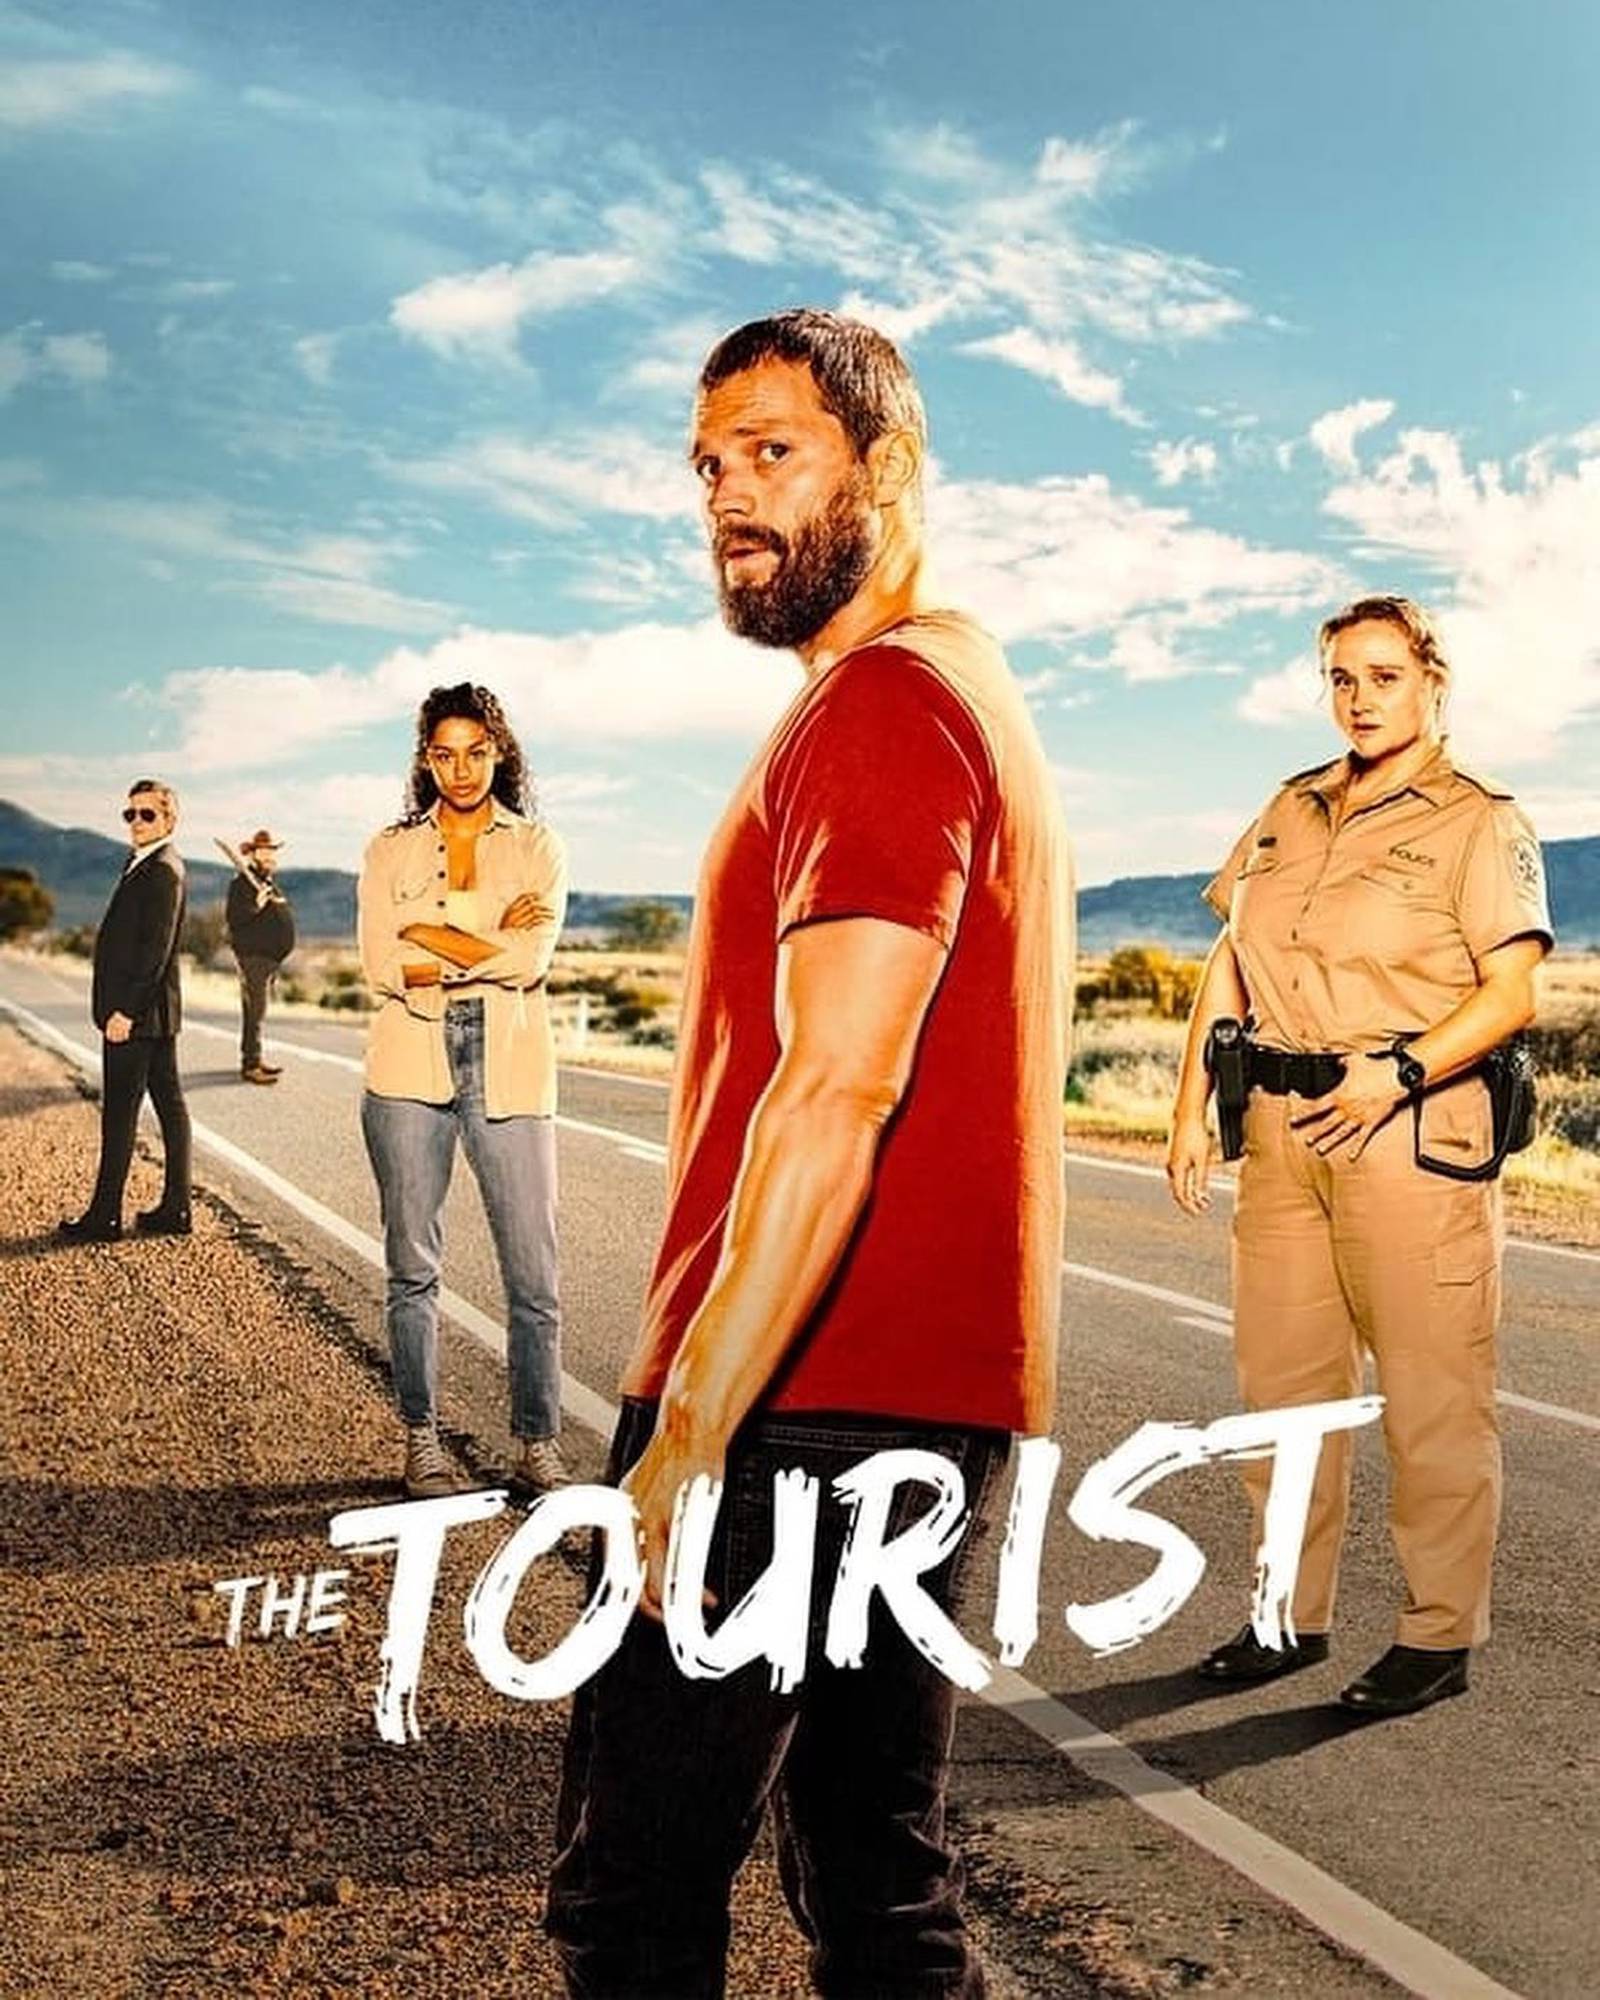 review of the tourist on hbo max